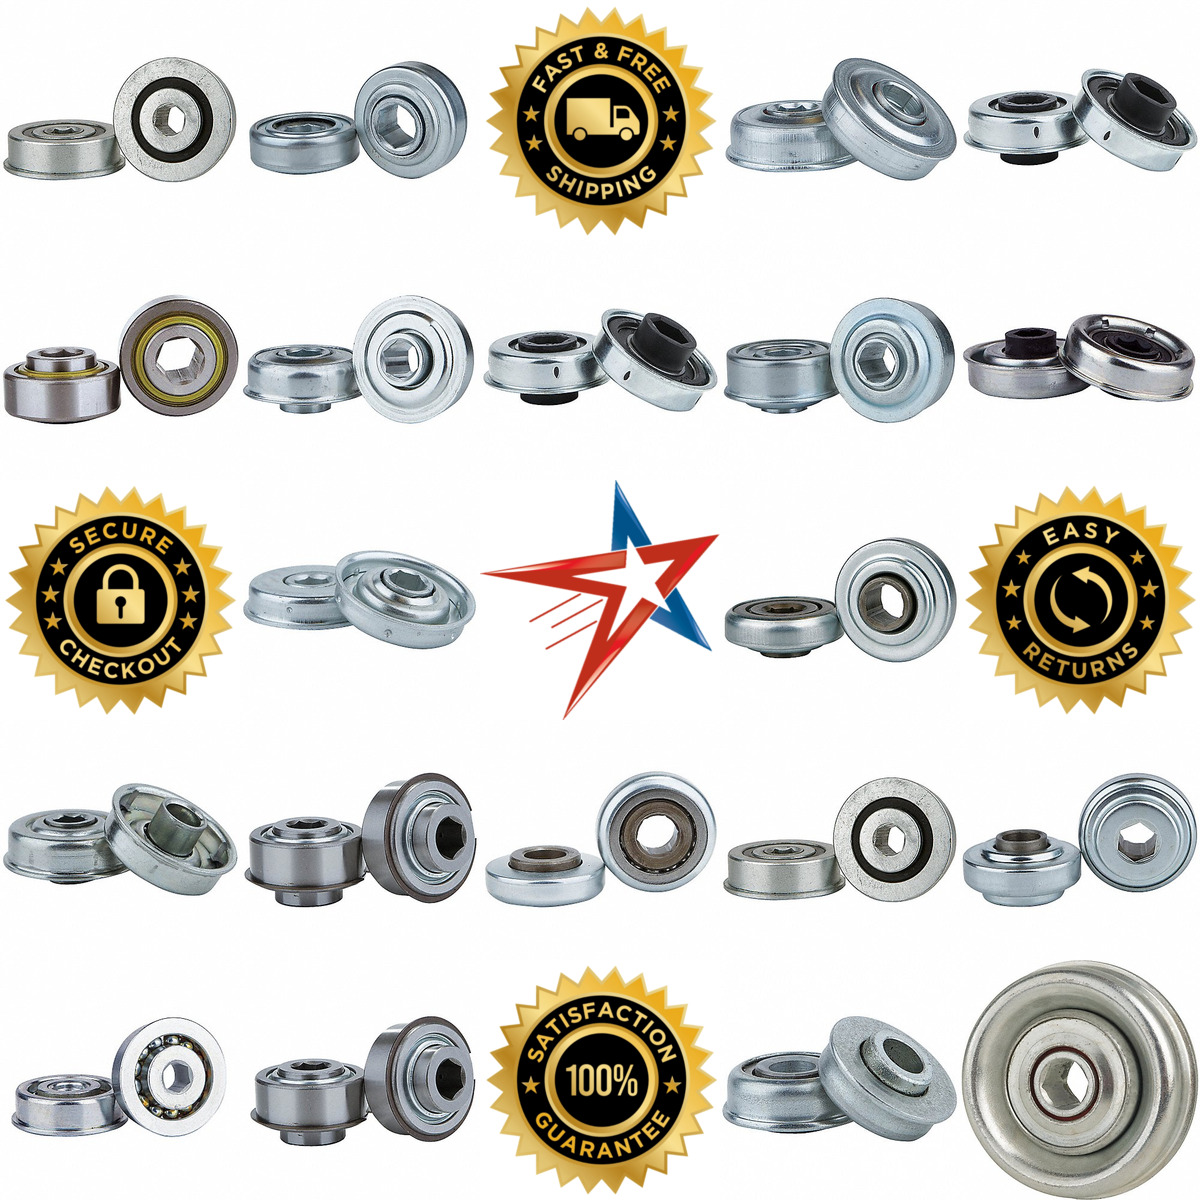 A selection of Conveyor Roller Bearings products on GoVets